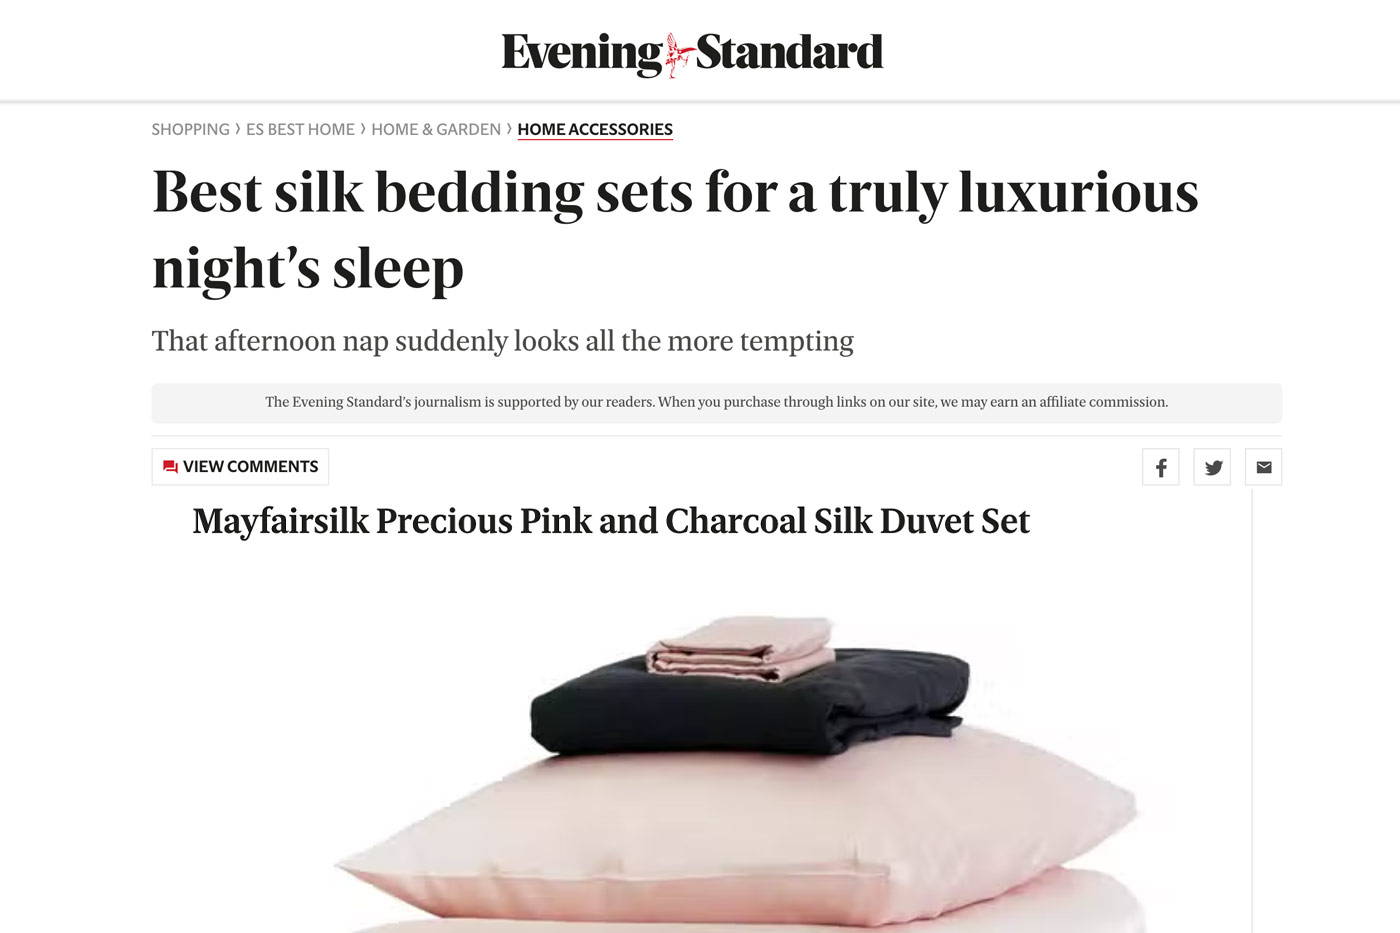 Evening Standard Reviews Mayfairsilk as one of the best silk bedding brands on the market